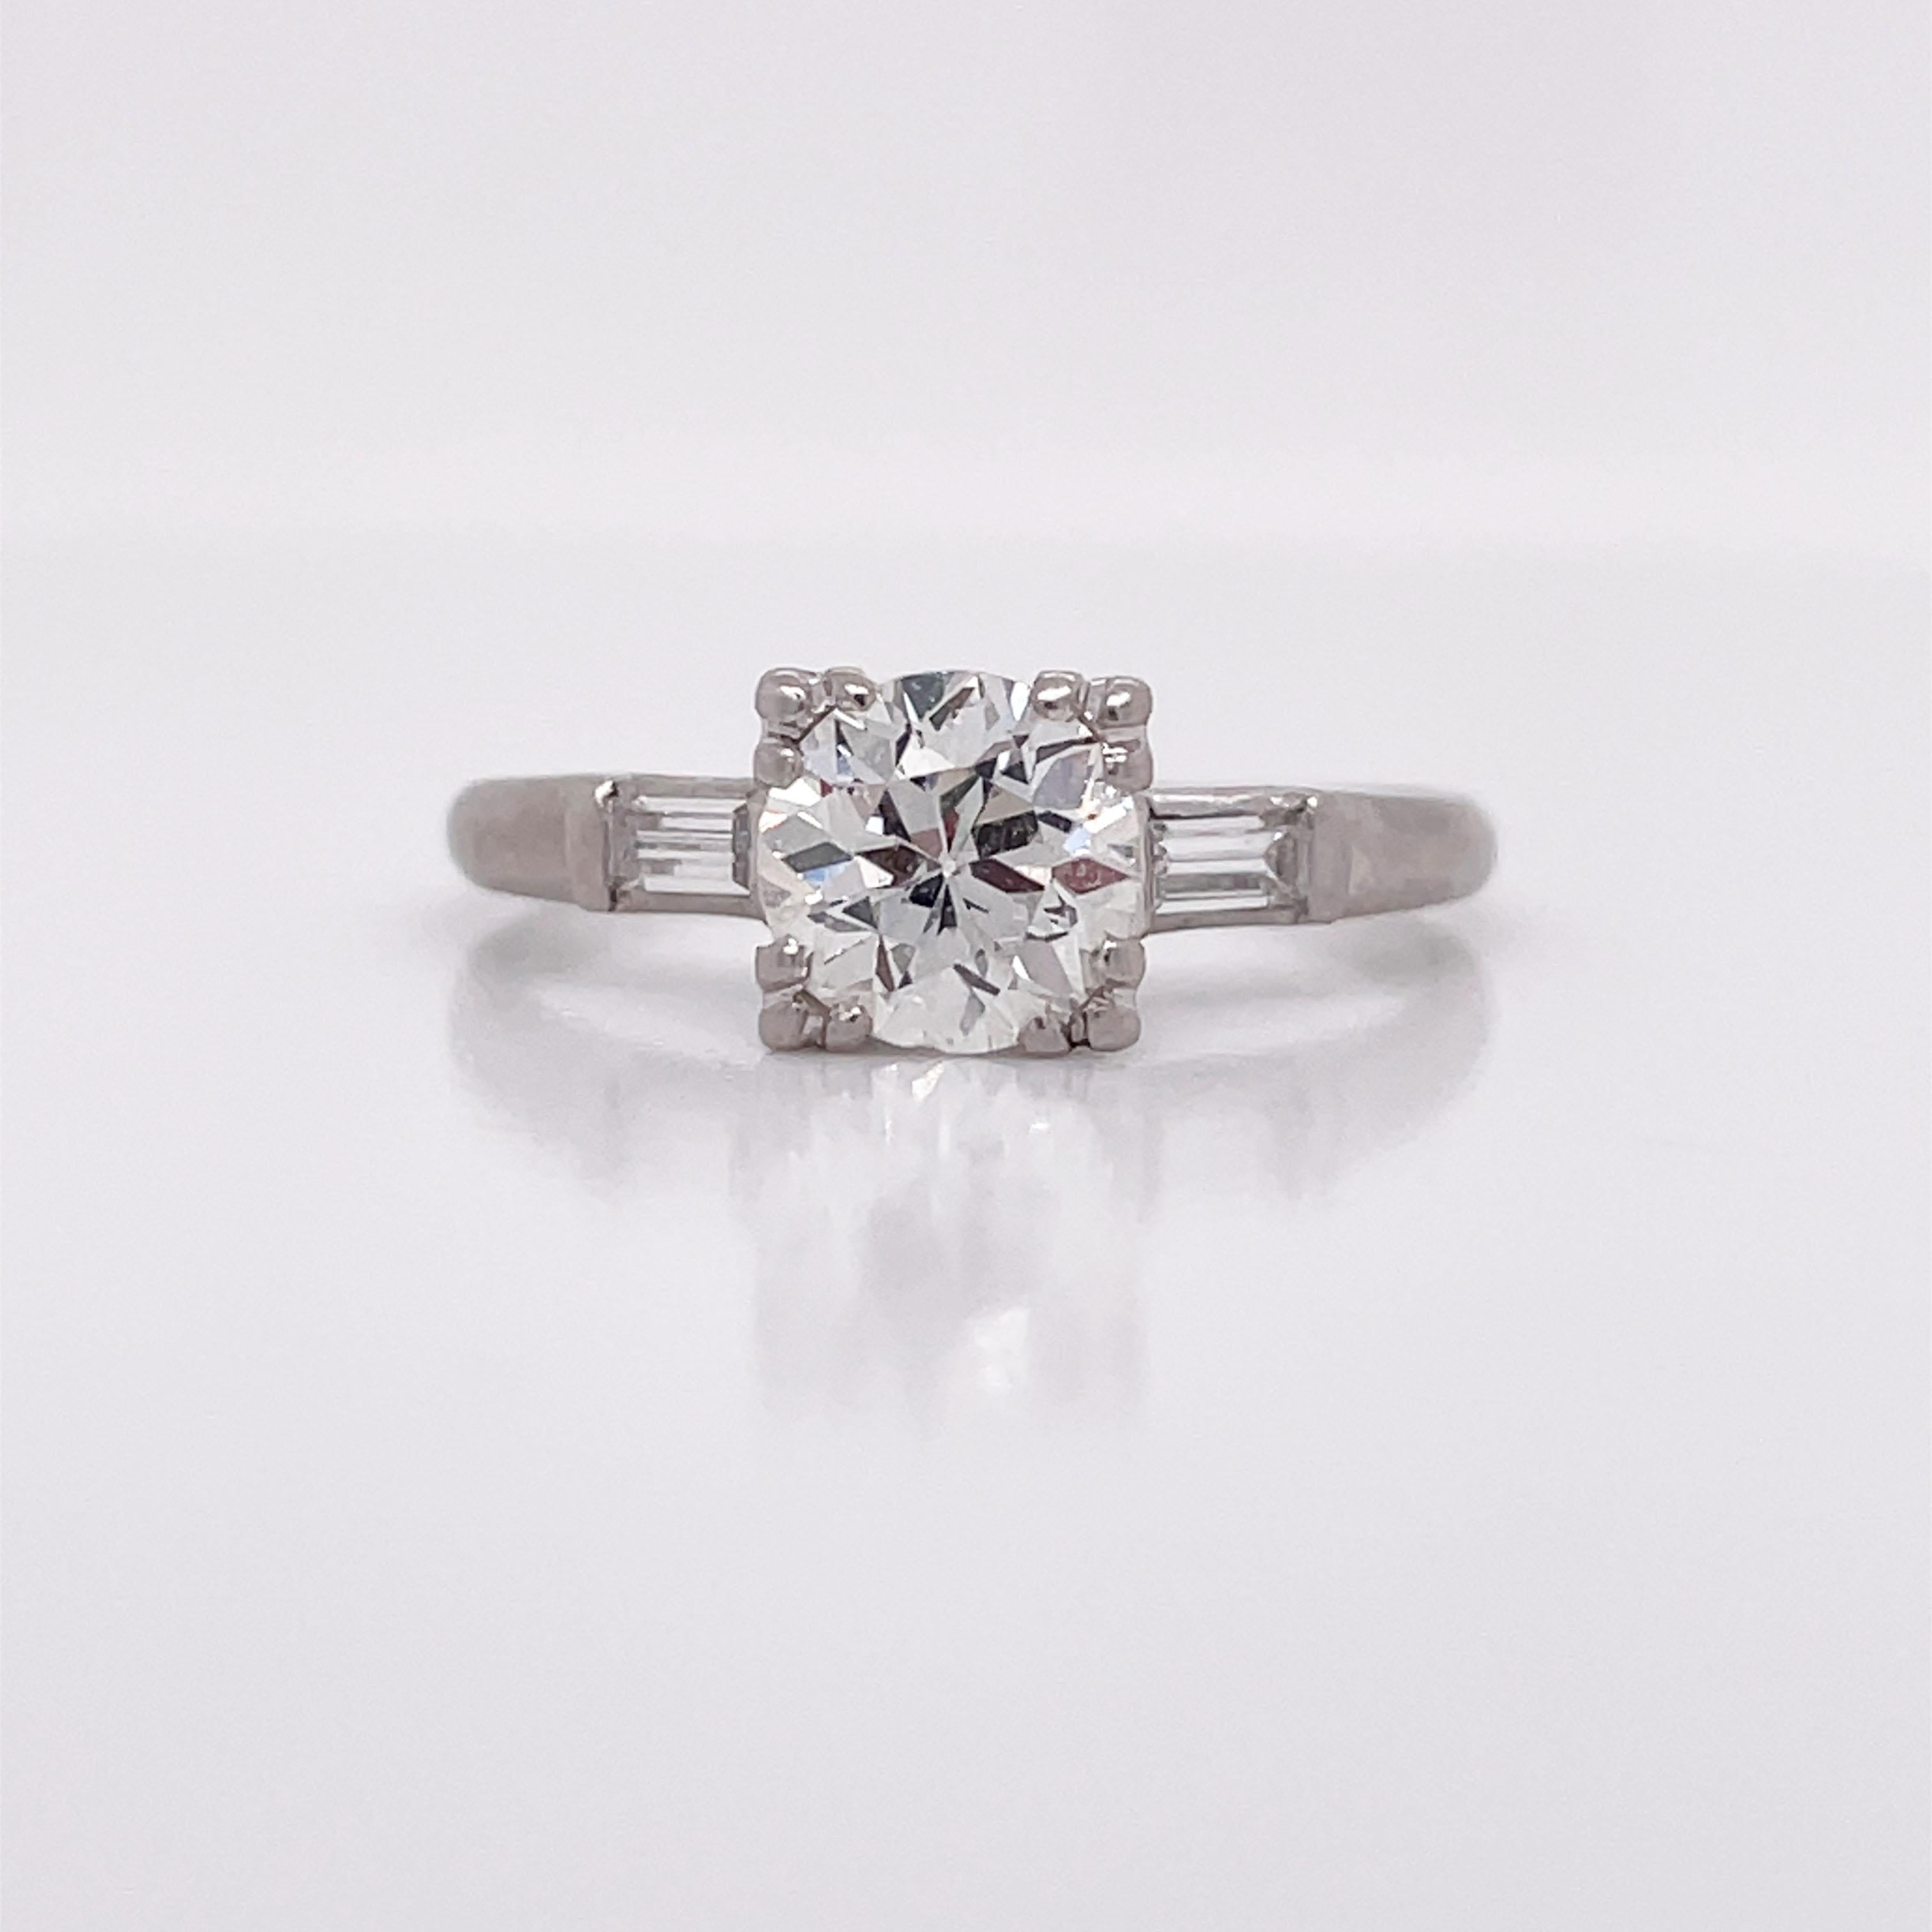 This is a magnificent Deco Engagement ring, dating back to the 1940s, set in platinum! This is the perfect ring to say 